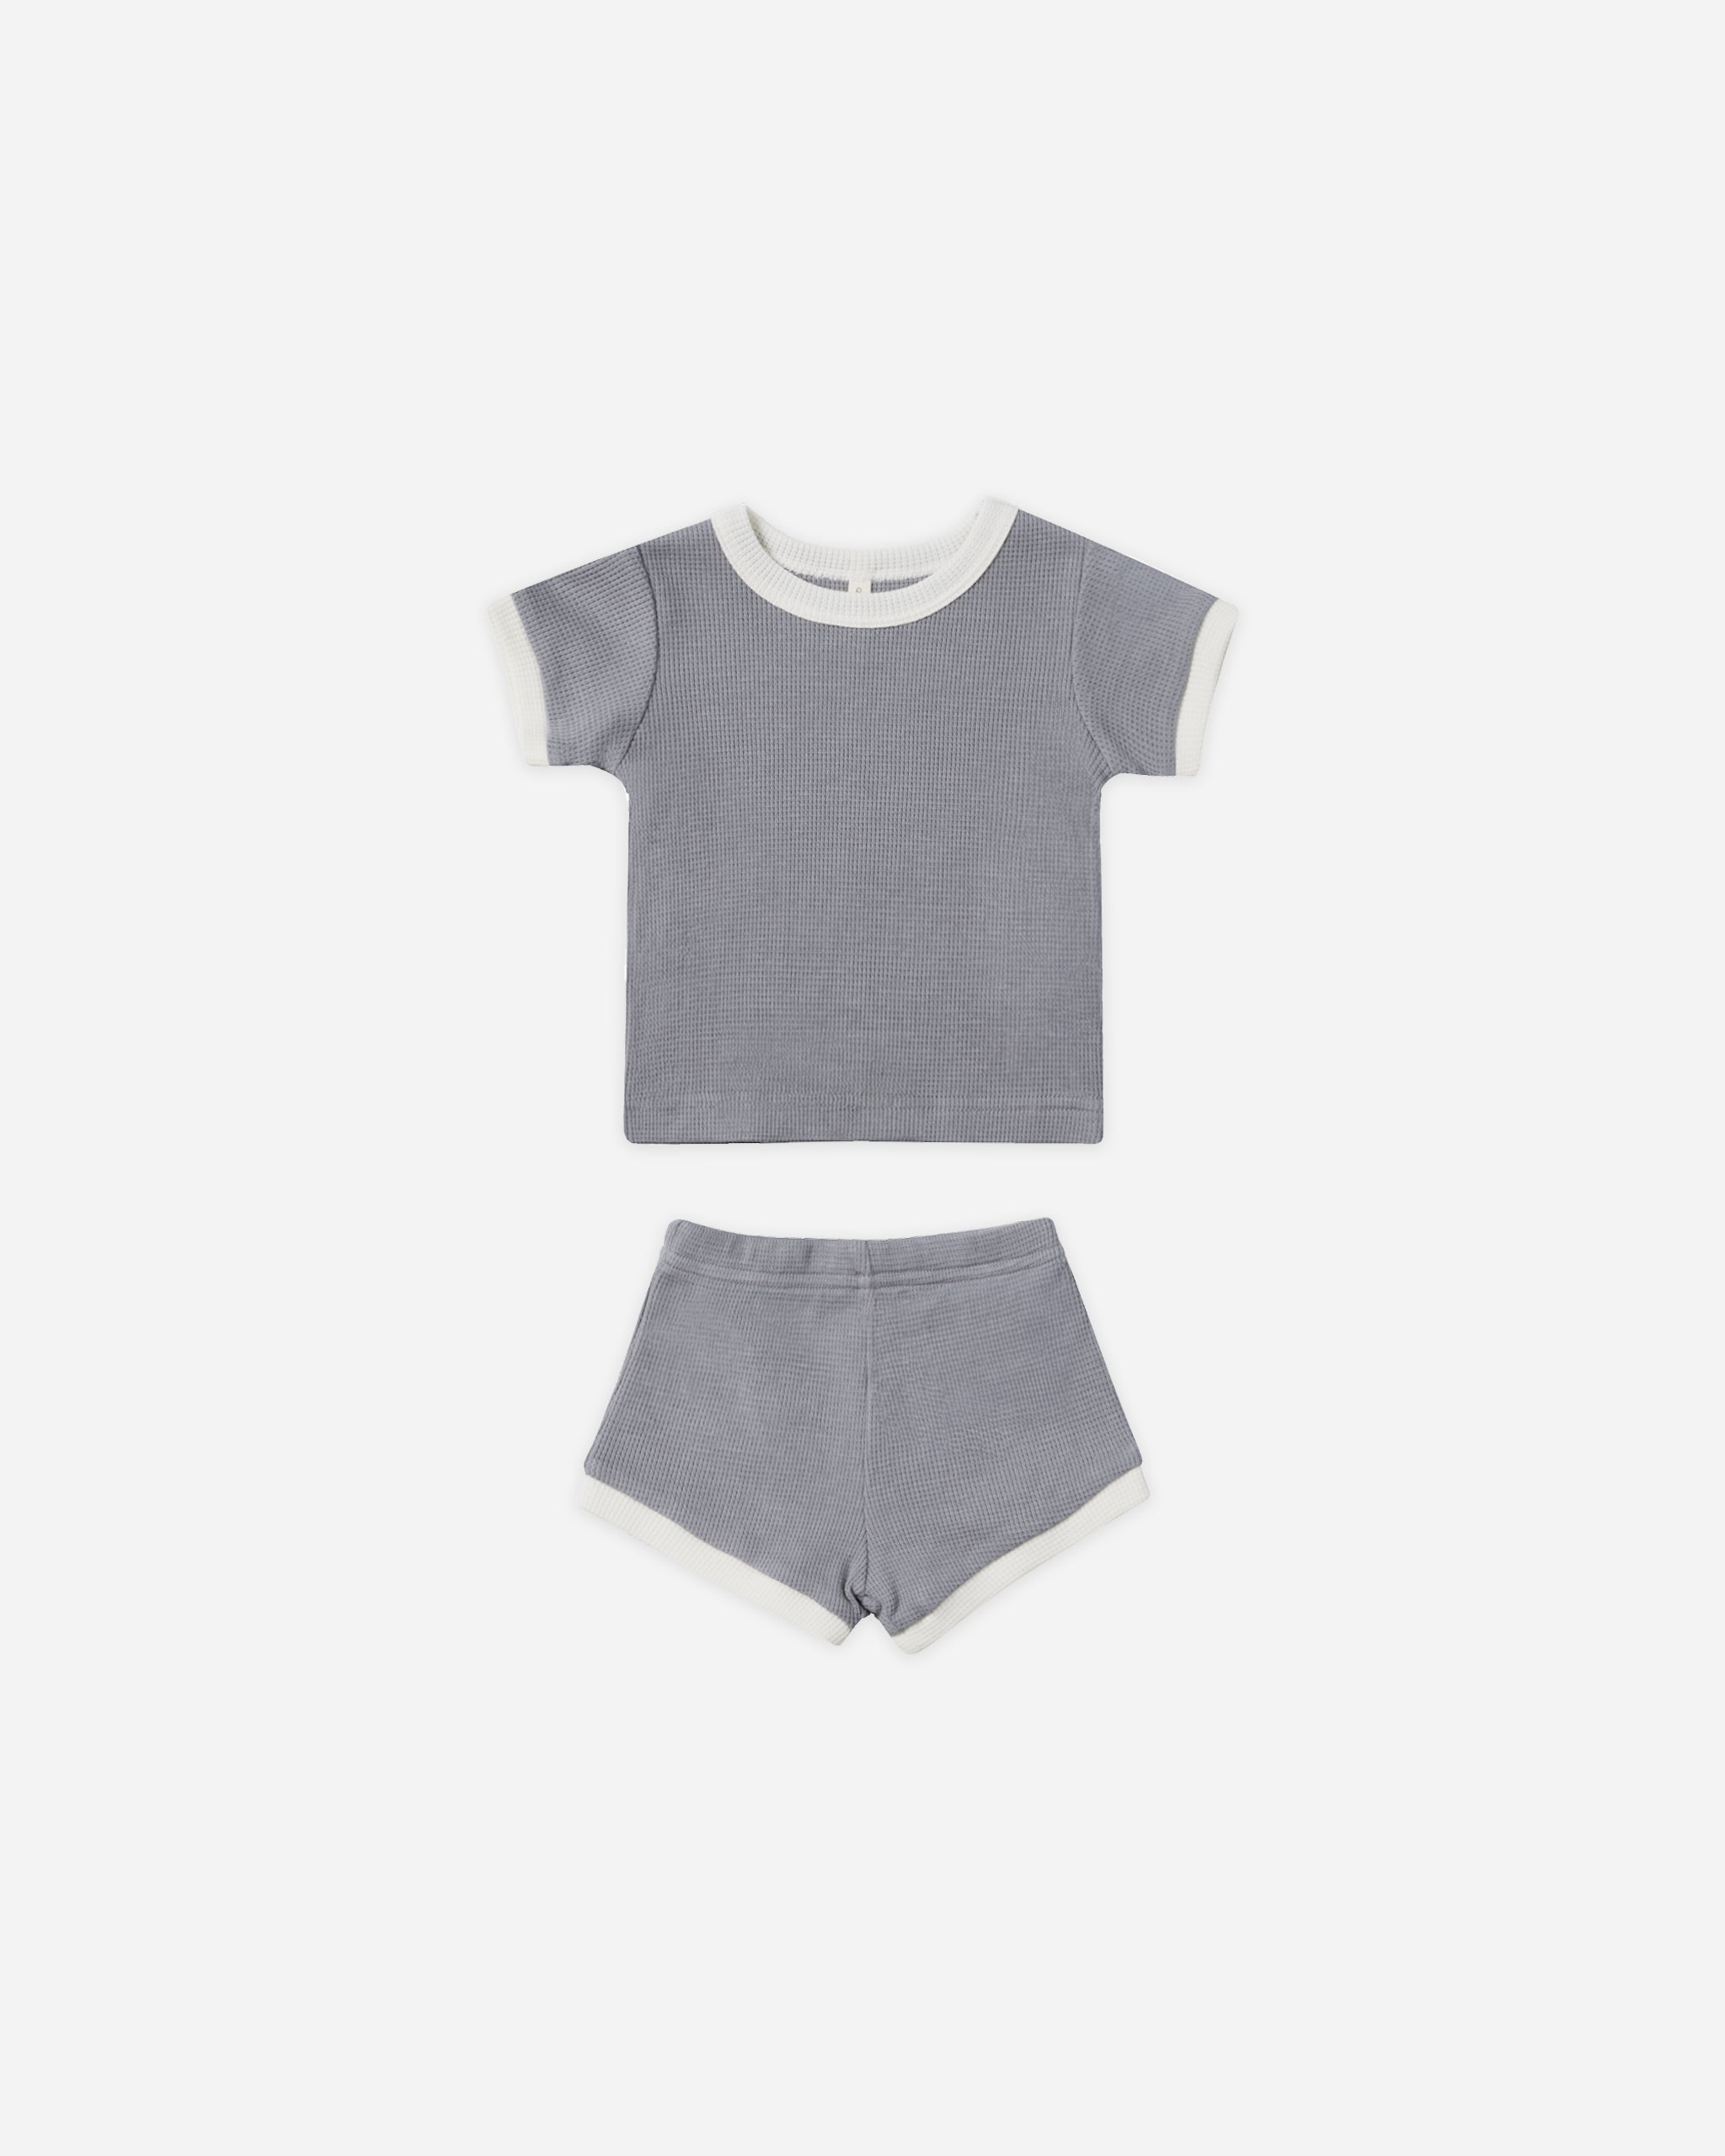 Waffle Shortie Set || Lagoon - Rylee + Cru | Kids Clothes | Trendy Baby Clothes | Modern Infant Outfits |